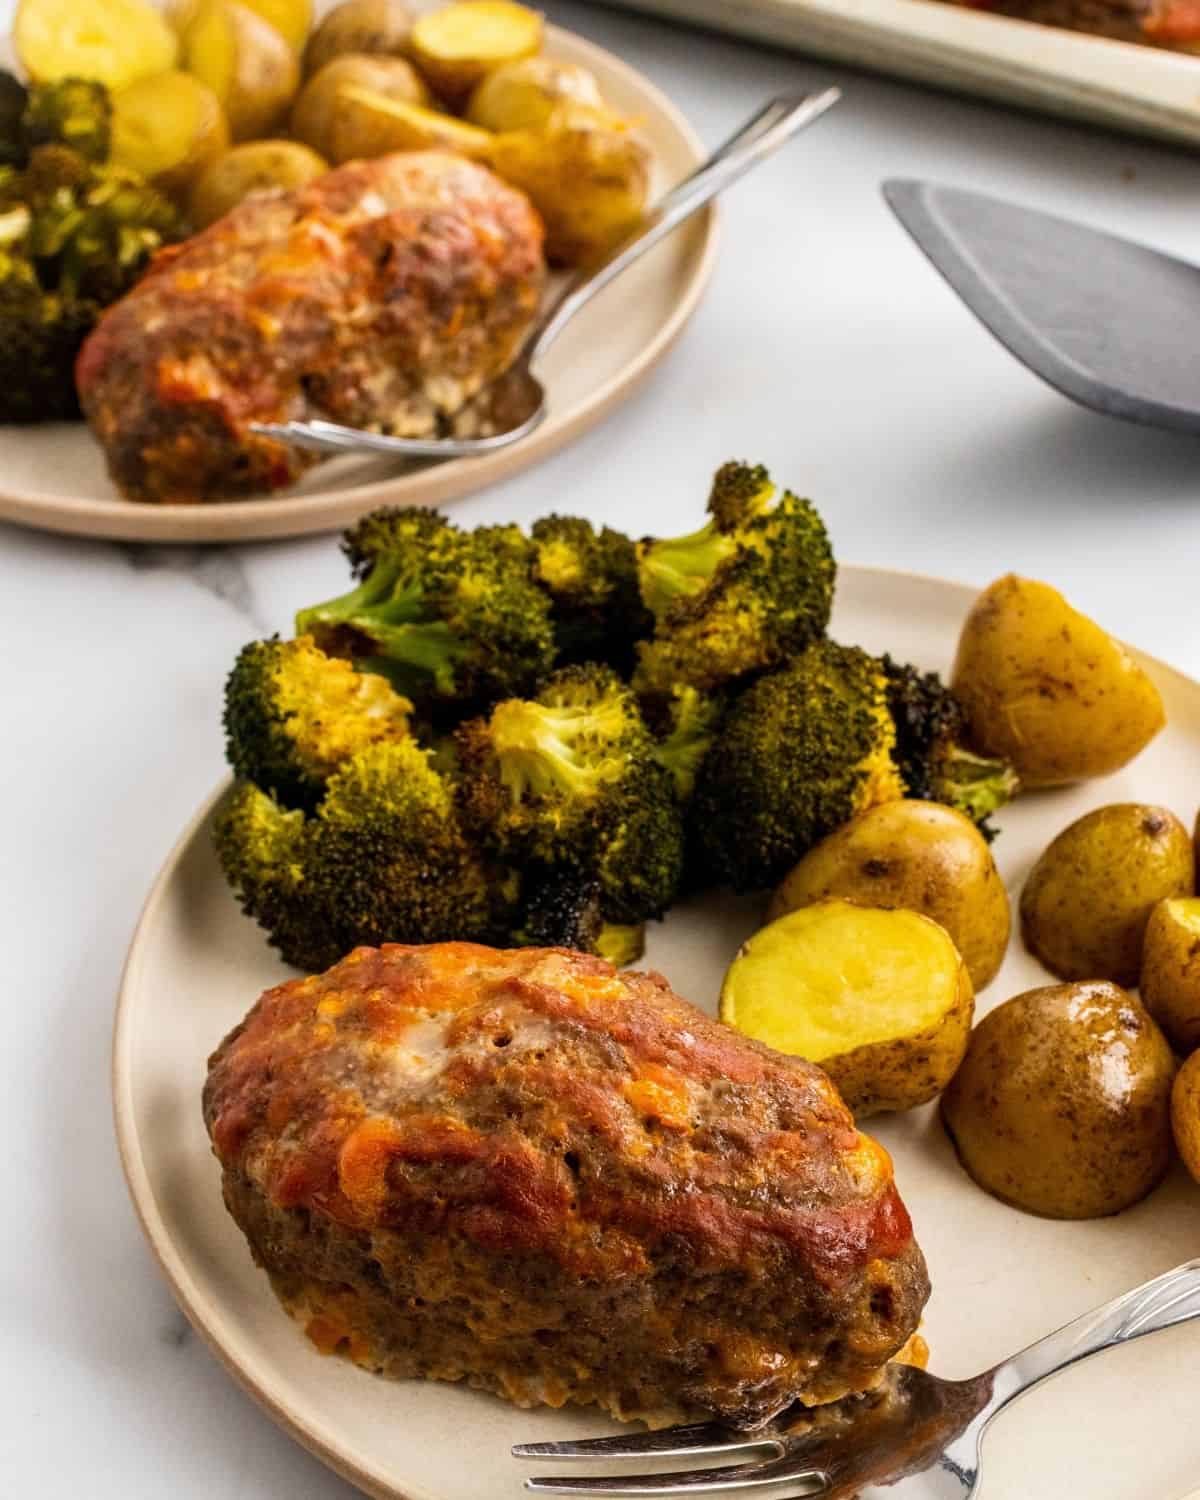 two plates with a piece of meatloaf, potatoes, and broccoli